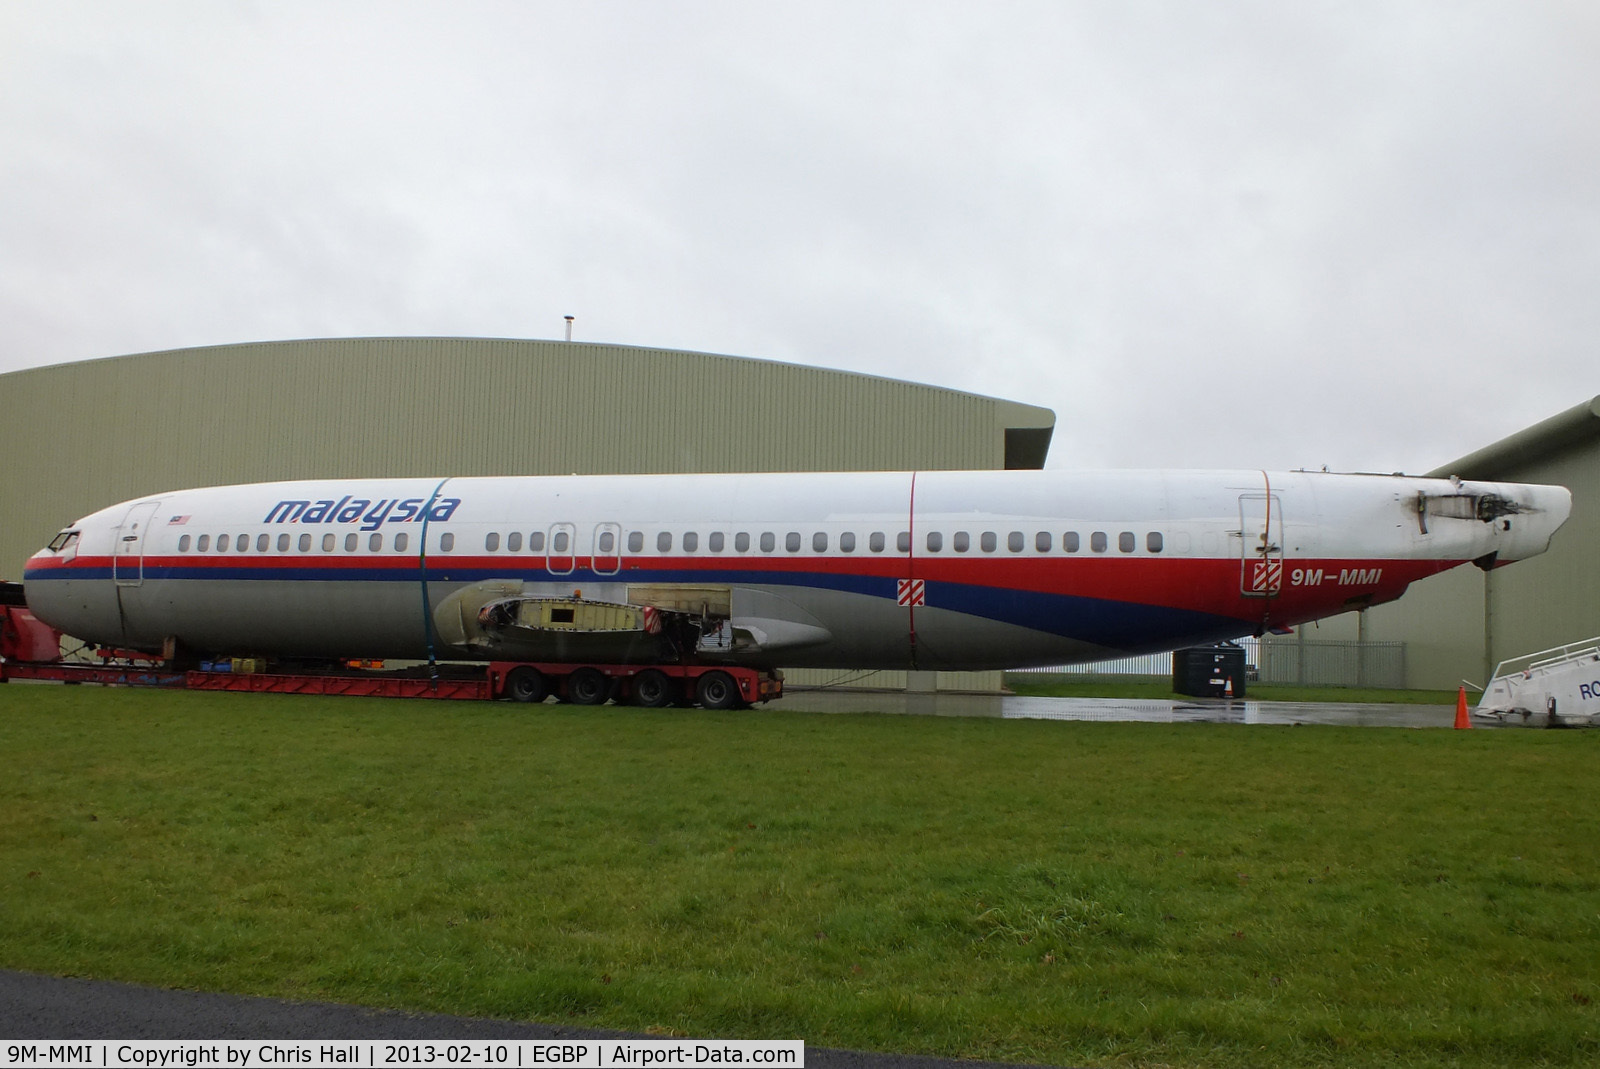 9M-MMI, 1992 Boeing 737-4H6 C/N 27096, ex Malaysia Airlines B737 fuselage on a lowloader at Kemble